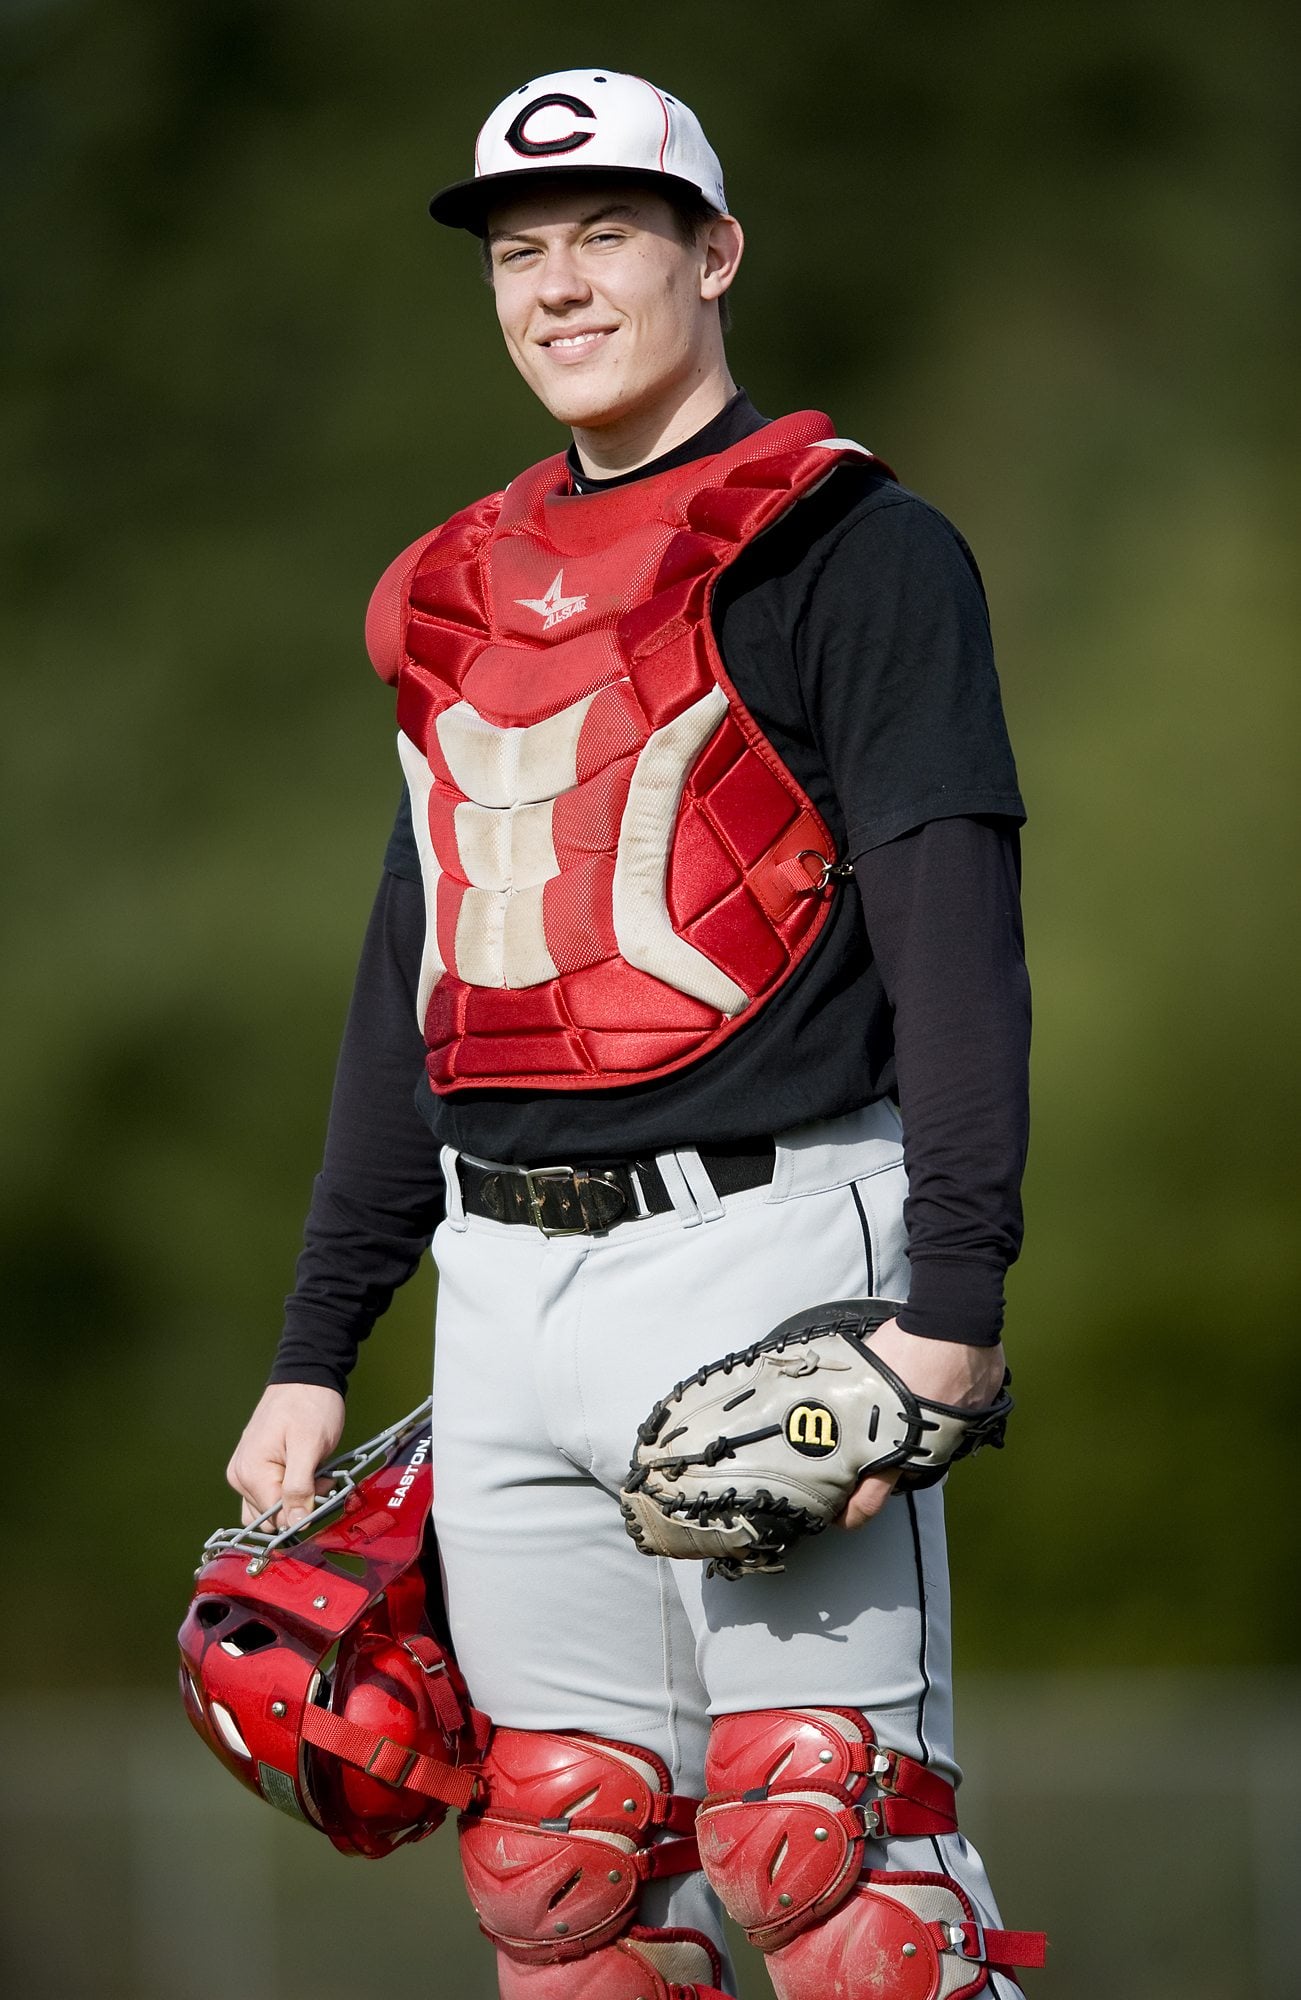 Camas High catcher Austin Barr carries a 4.0 grade-point average while taking Advanced Placement classes -- all of which earned him a scholarship to Stanford University.